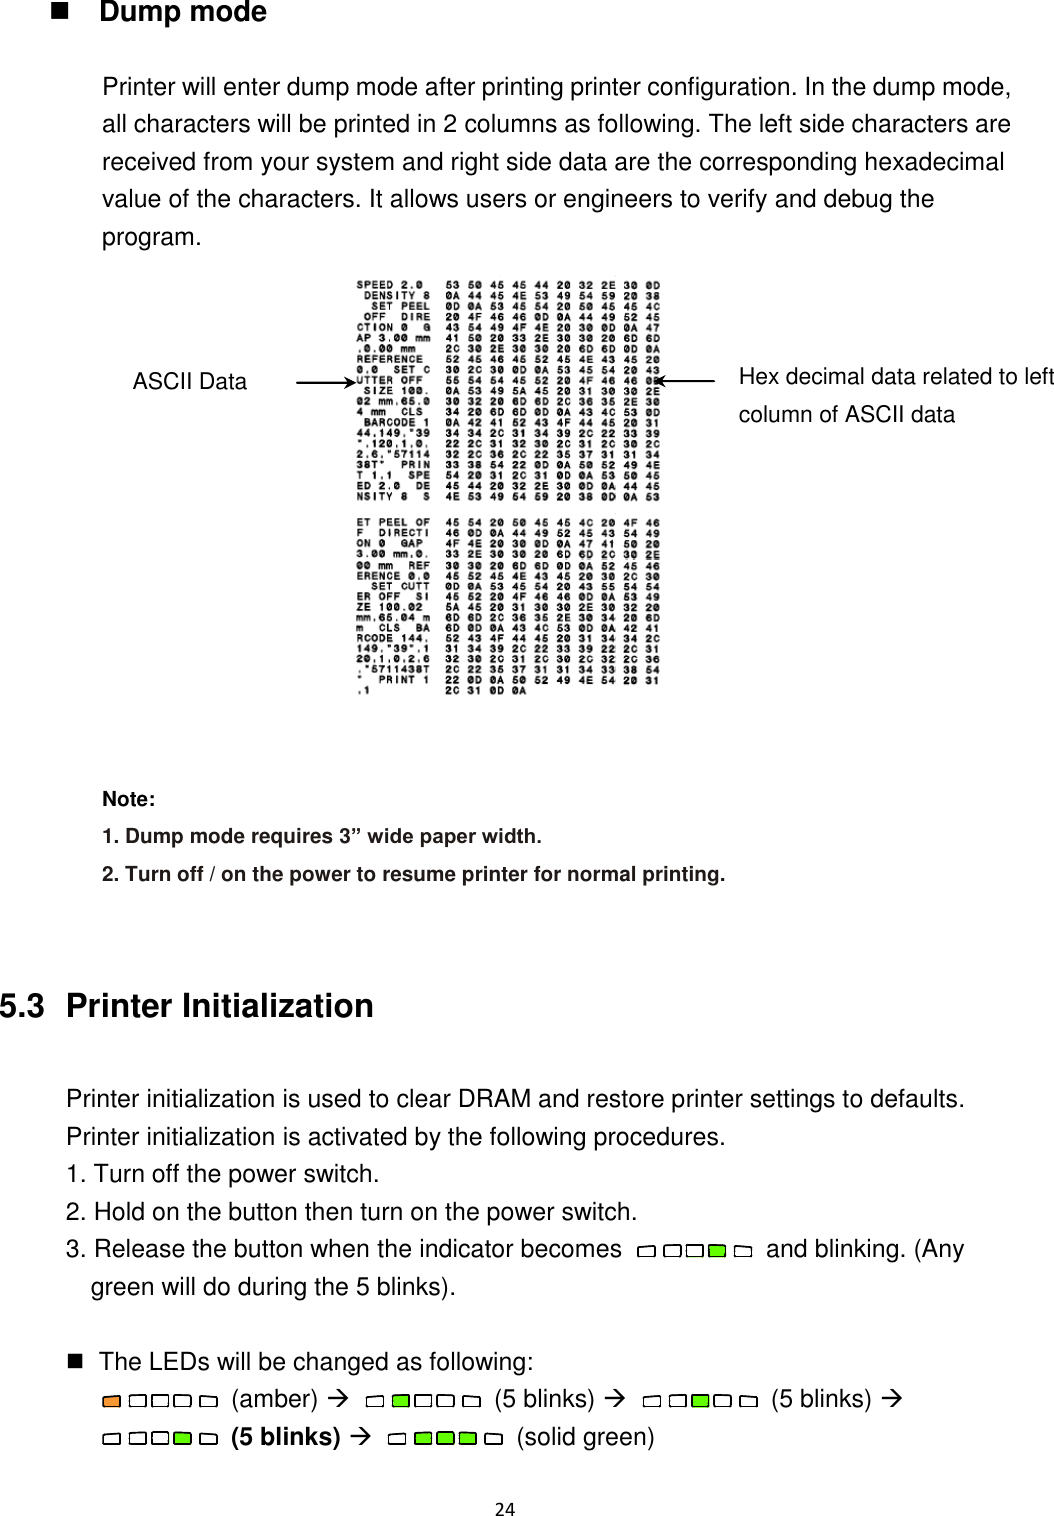 24   Dump mode  Printer will enter dump mode after printing printer configuration. In the dump mode, all characters will be printed in 2 columns as following. The left side characters are received from your system and right side data are the corresponding hexadecimal value of the characters. It allows users or engineers to verify and debug the program.    Note: 1. Dump mode requires 3” wide paper width. 2. Turn off / on the power to resume printer for normal printing.   5.3   Printer Initialization  Printer initialization is used to clear DRAM and restore printer settings to defaults. Printer initialization is activated by the following procedures. 1. Turn off the power switch. 2. Hold on the button then turn on the power switch. 3. Release the button when the indicator becomes    and blinking. (Any green will do during the 5 blinks).    The LEDs will be changed as following:     (amber)     (5 blinks)     (5 blinks)  (5 blinks)     (solid green)  ASCII Data Hex decimal data related to left column of ASCII data 